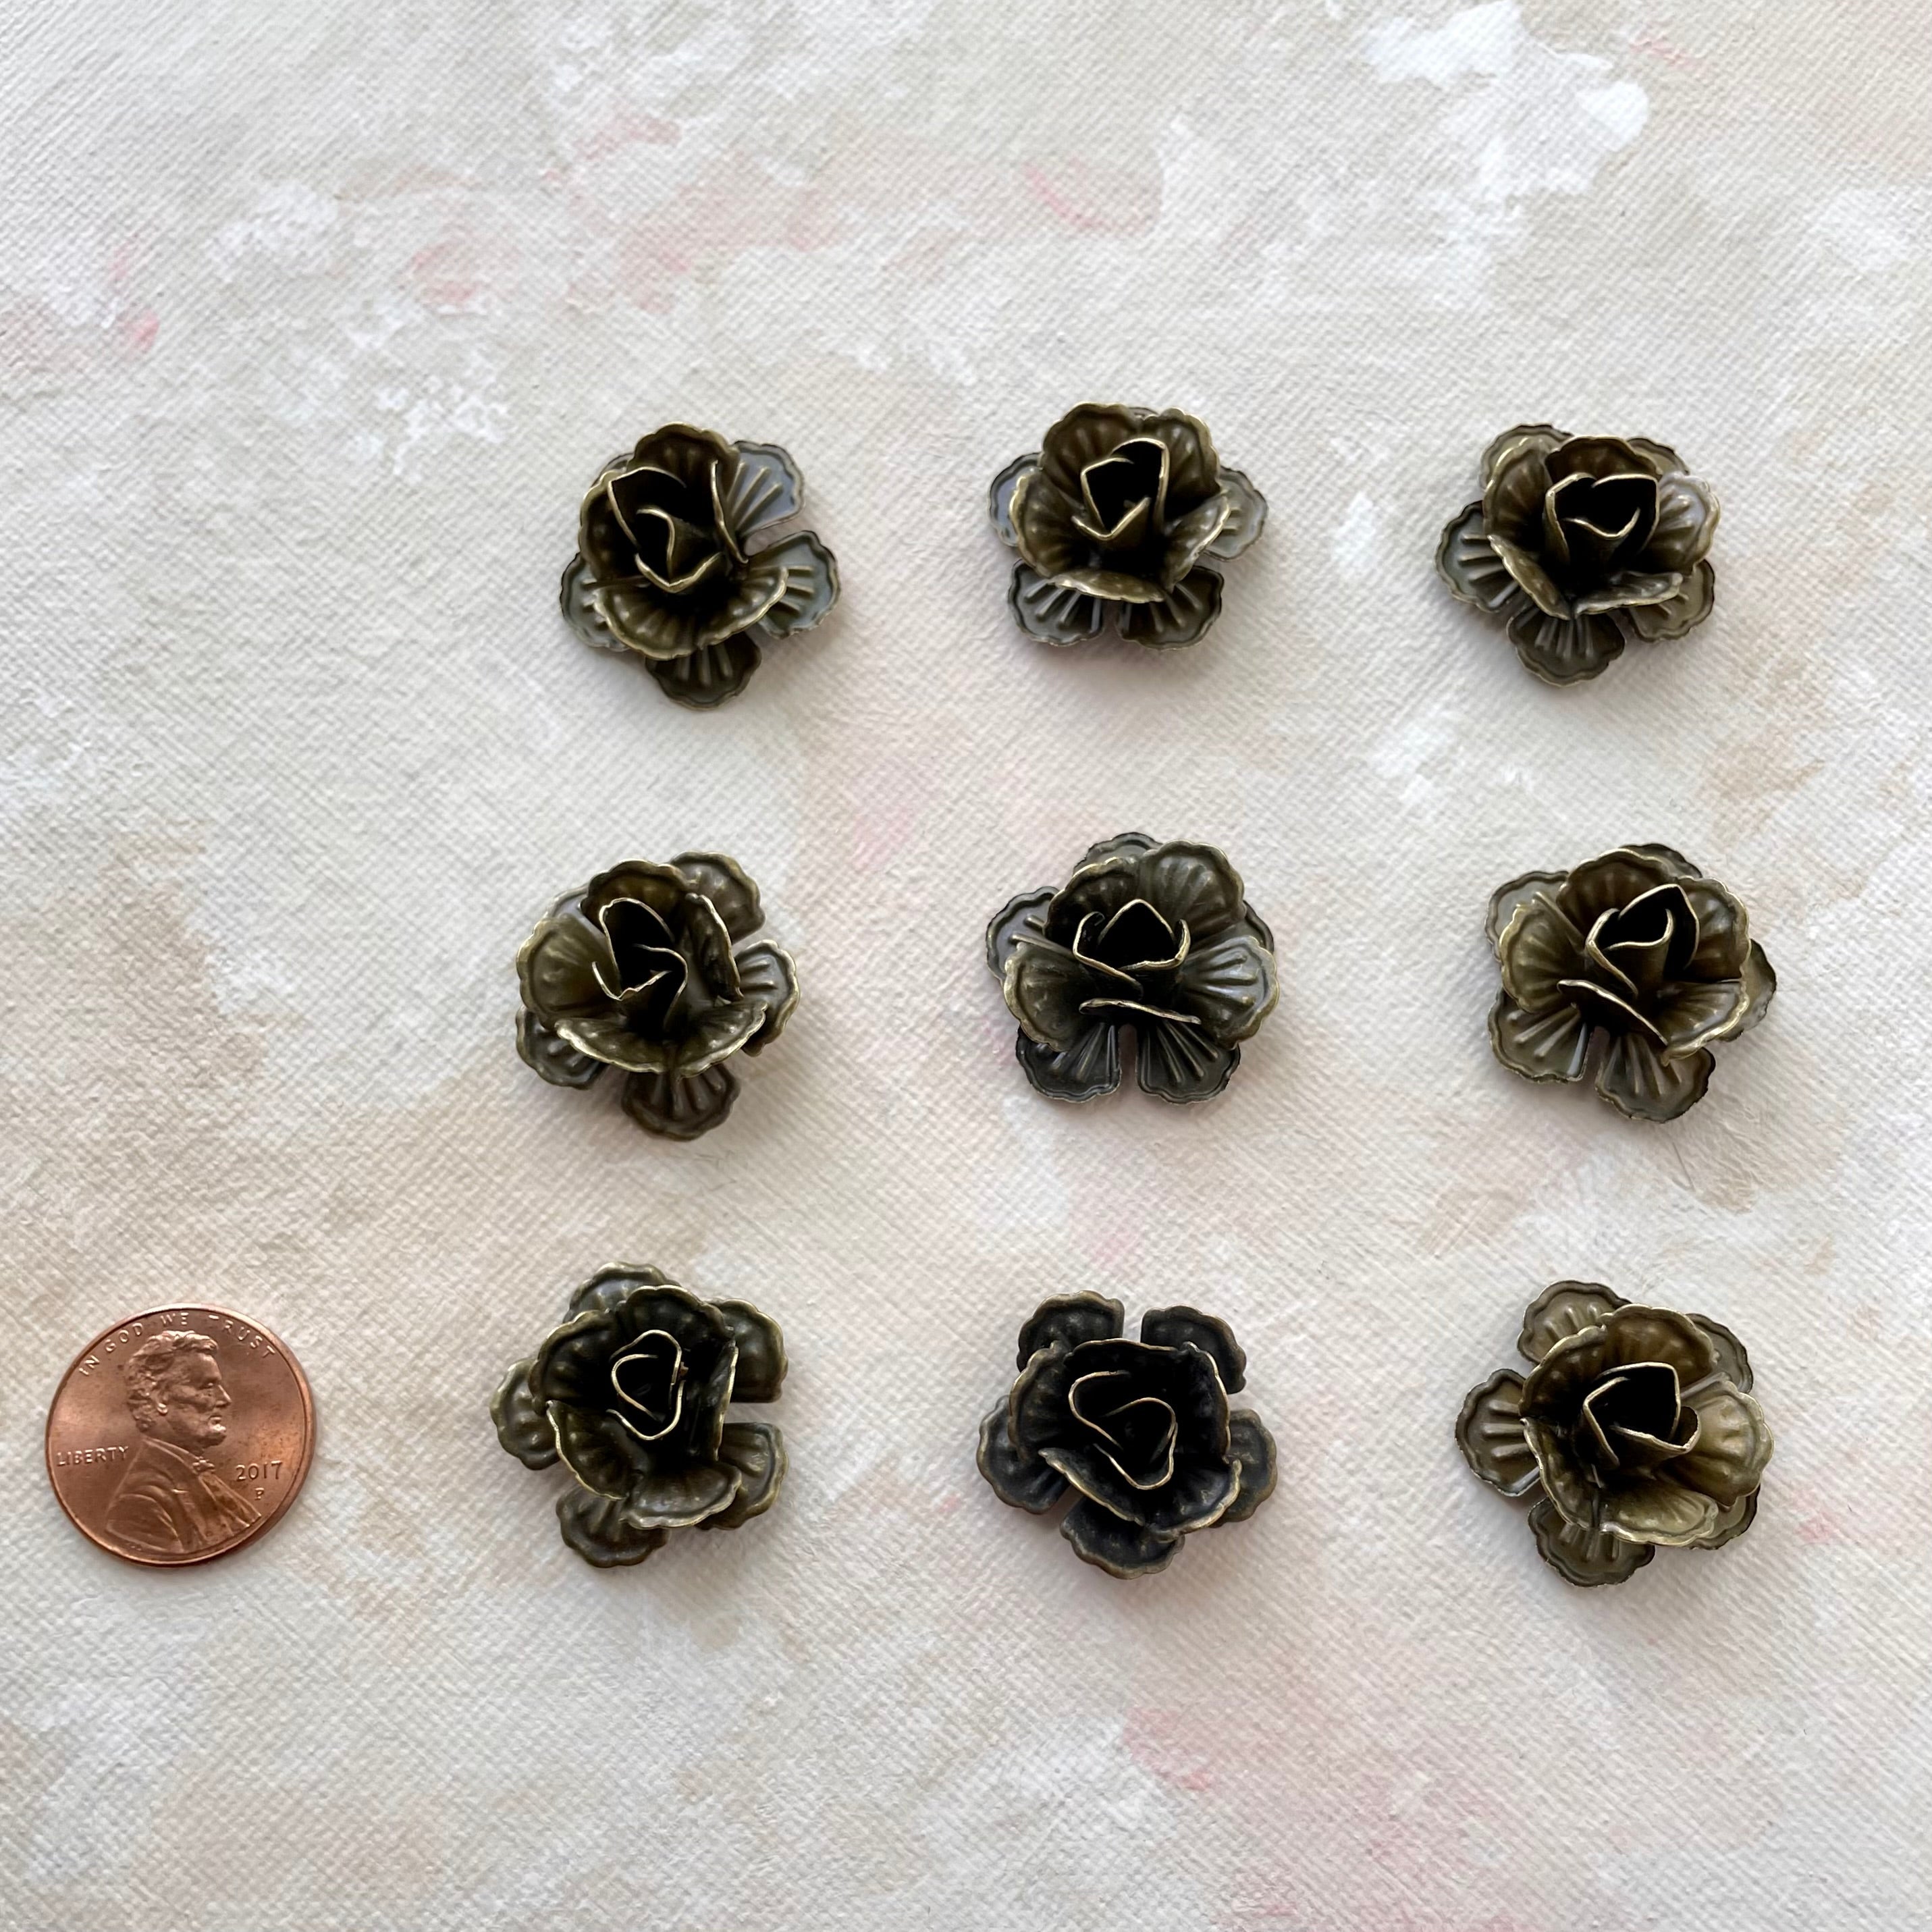 9 small metal styling flower with penny beside for size reference - flat lay props from Champagne & GRIT